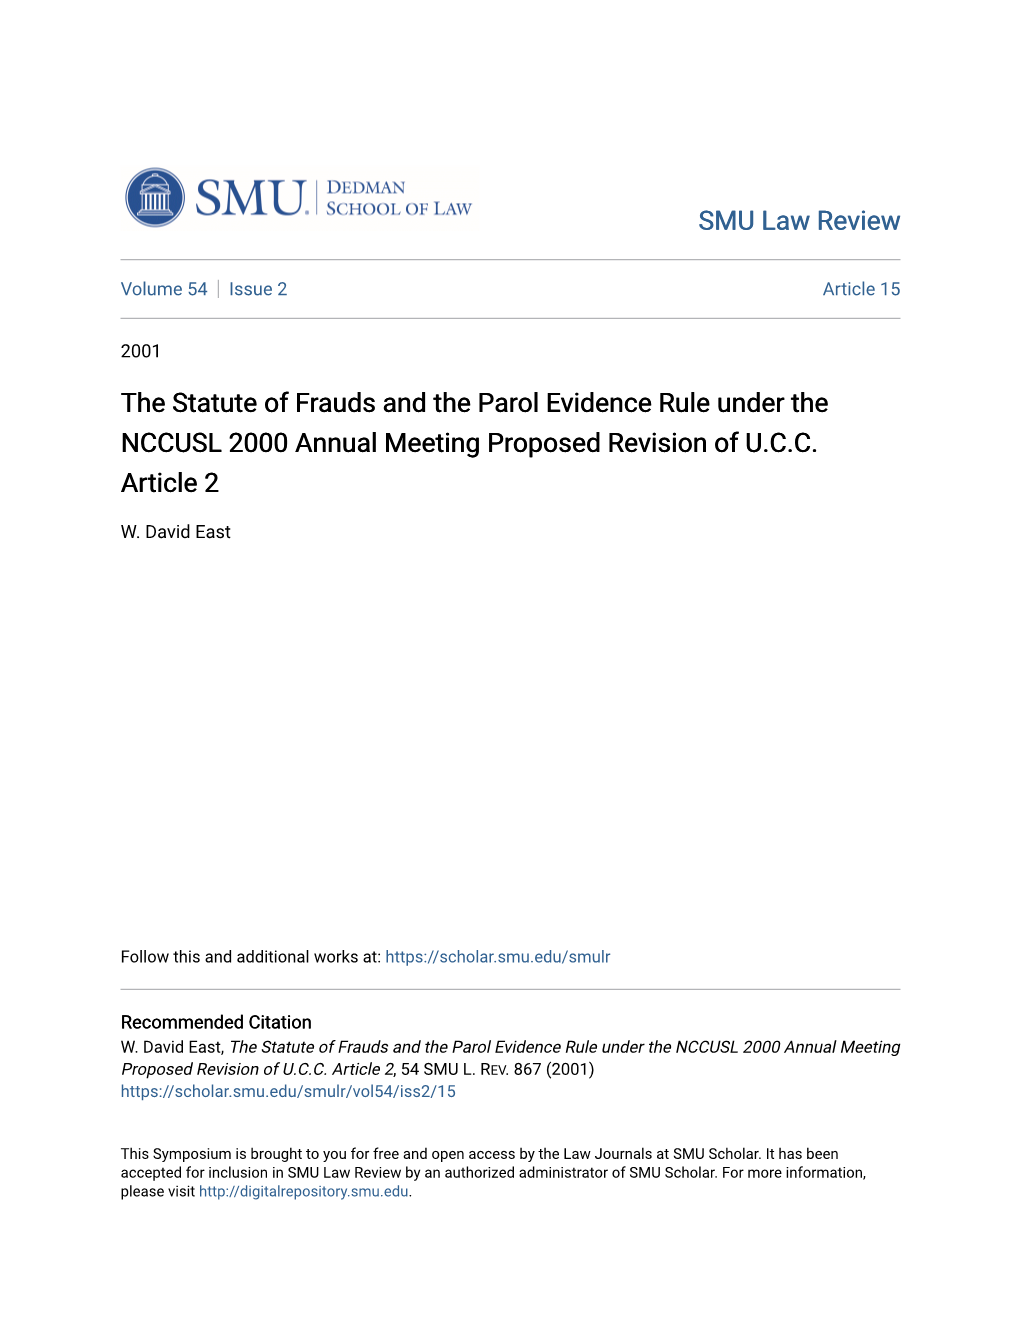 The Statute of Frauds and the Parol Evidence Rule Under the NCCUSL 2000 Annual Meeting Proposed Revision of U.C.C